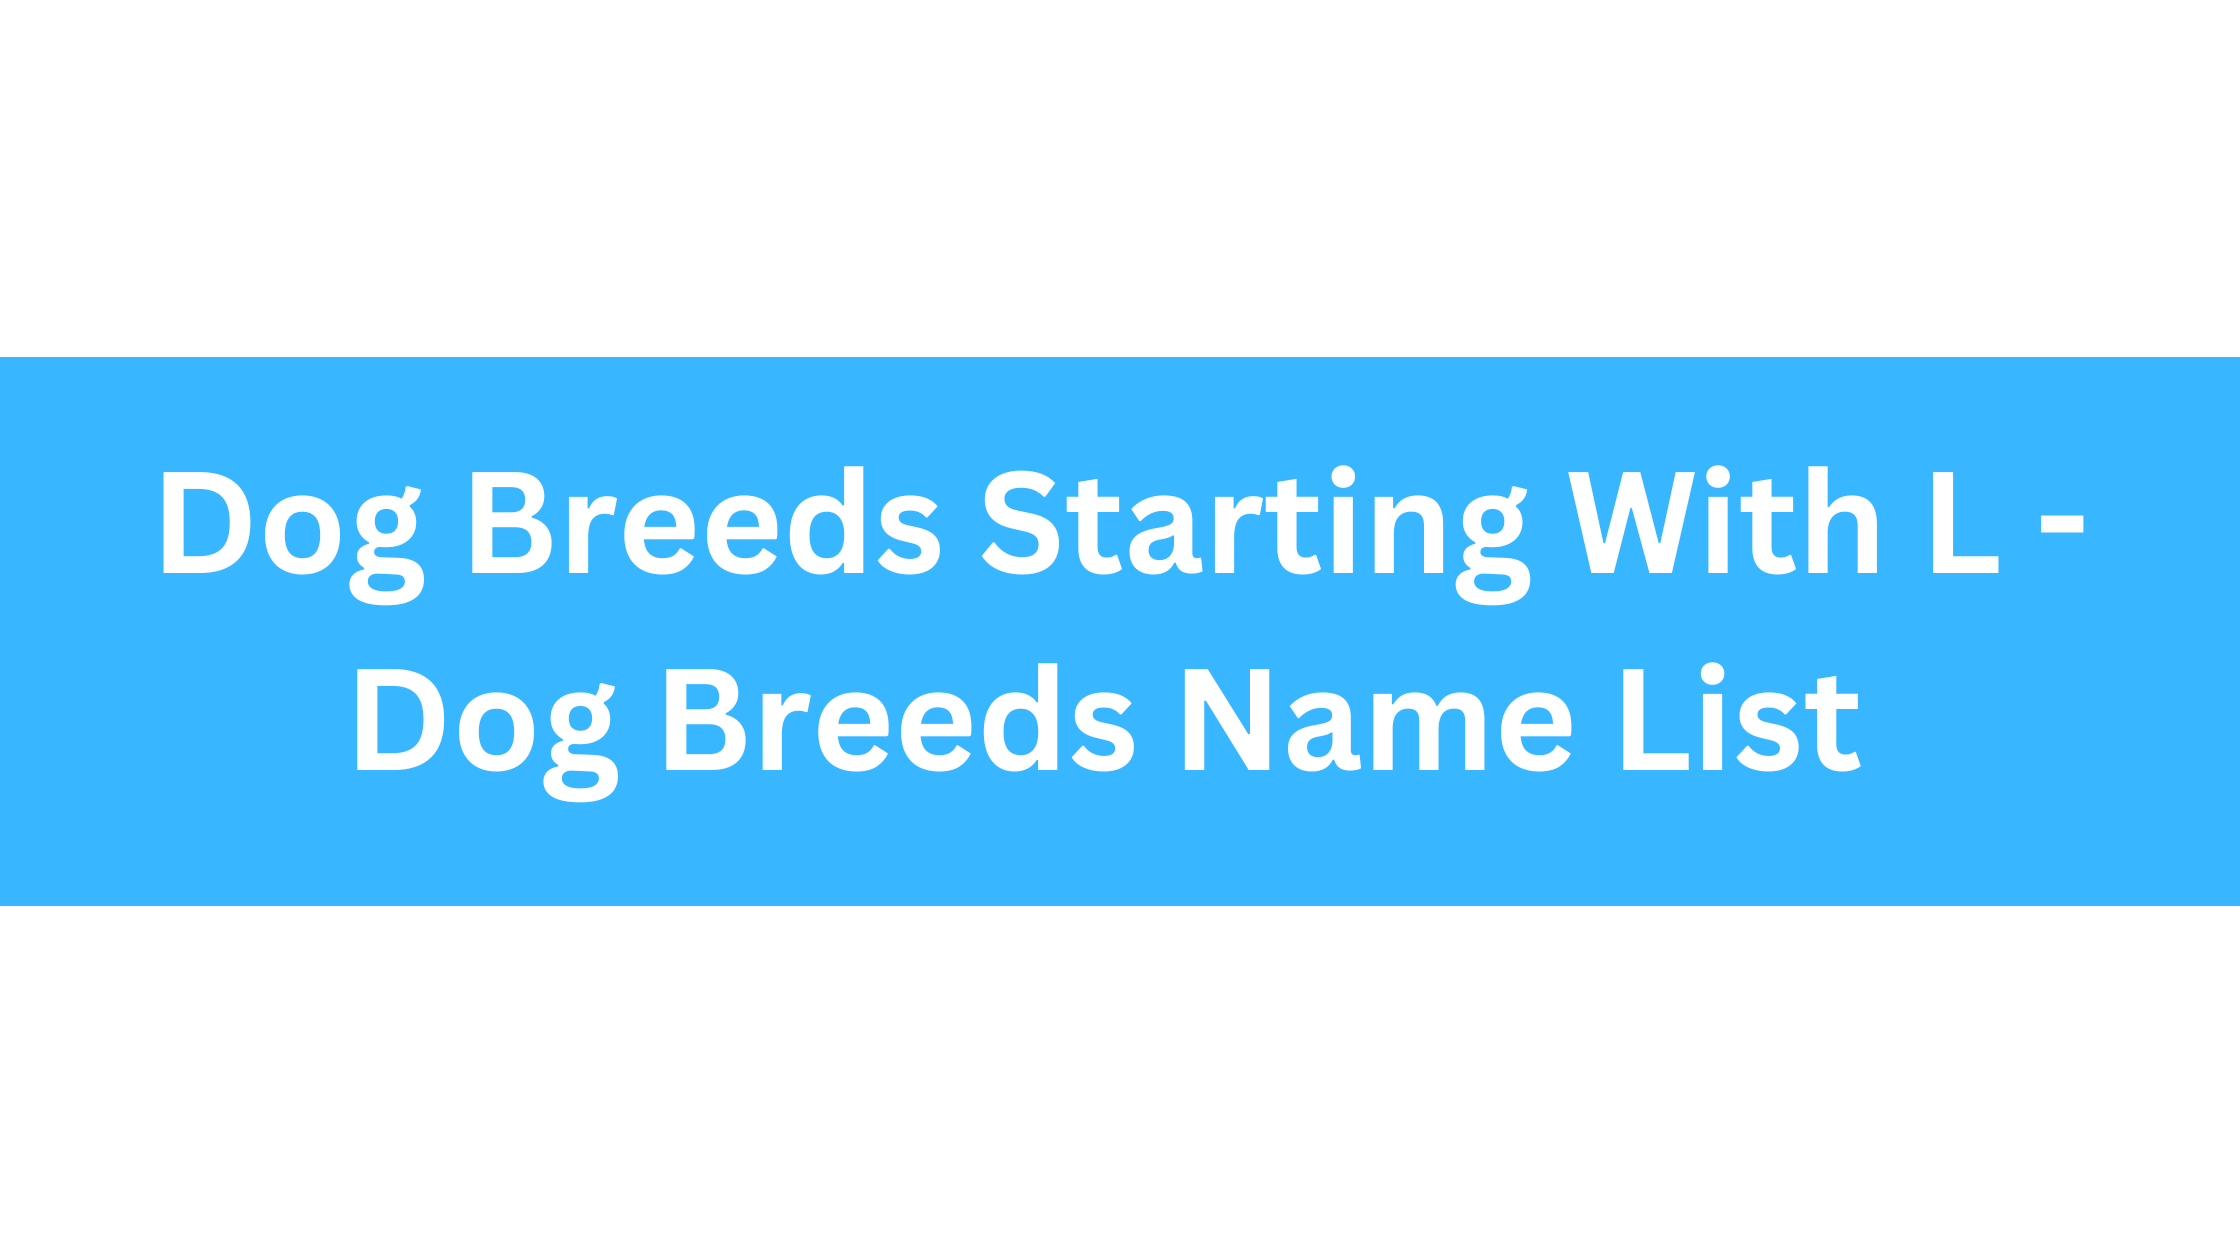 Dog Breeds Starting With L